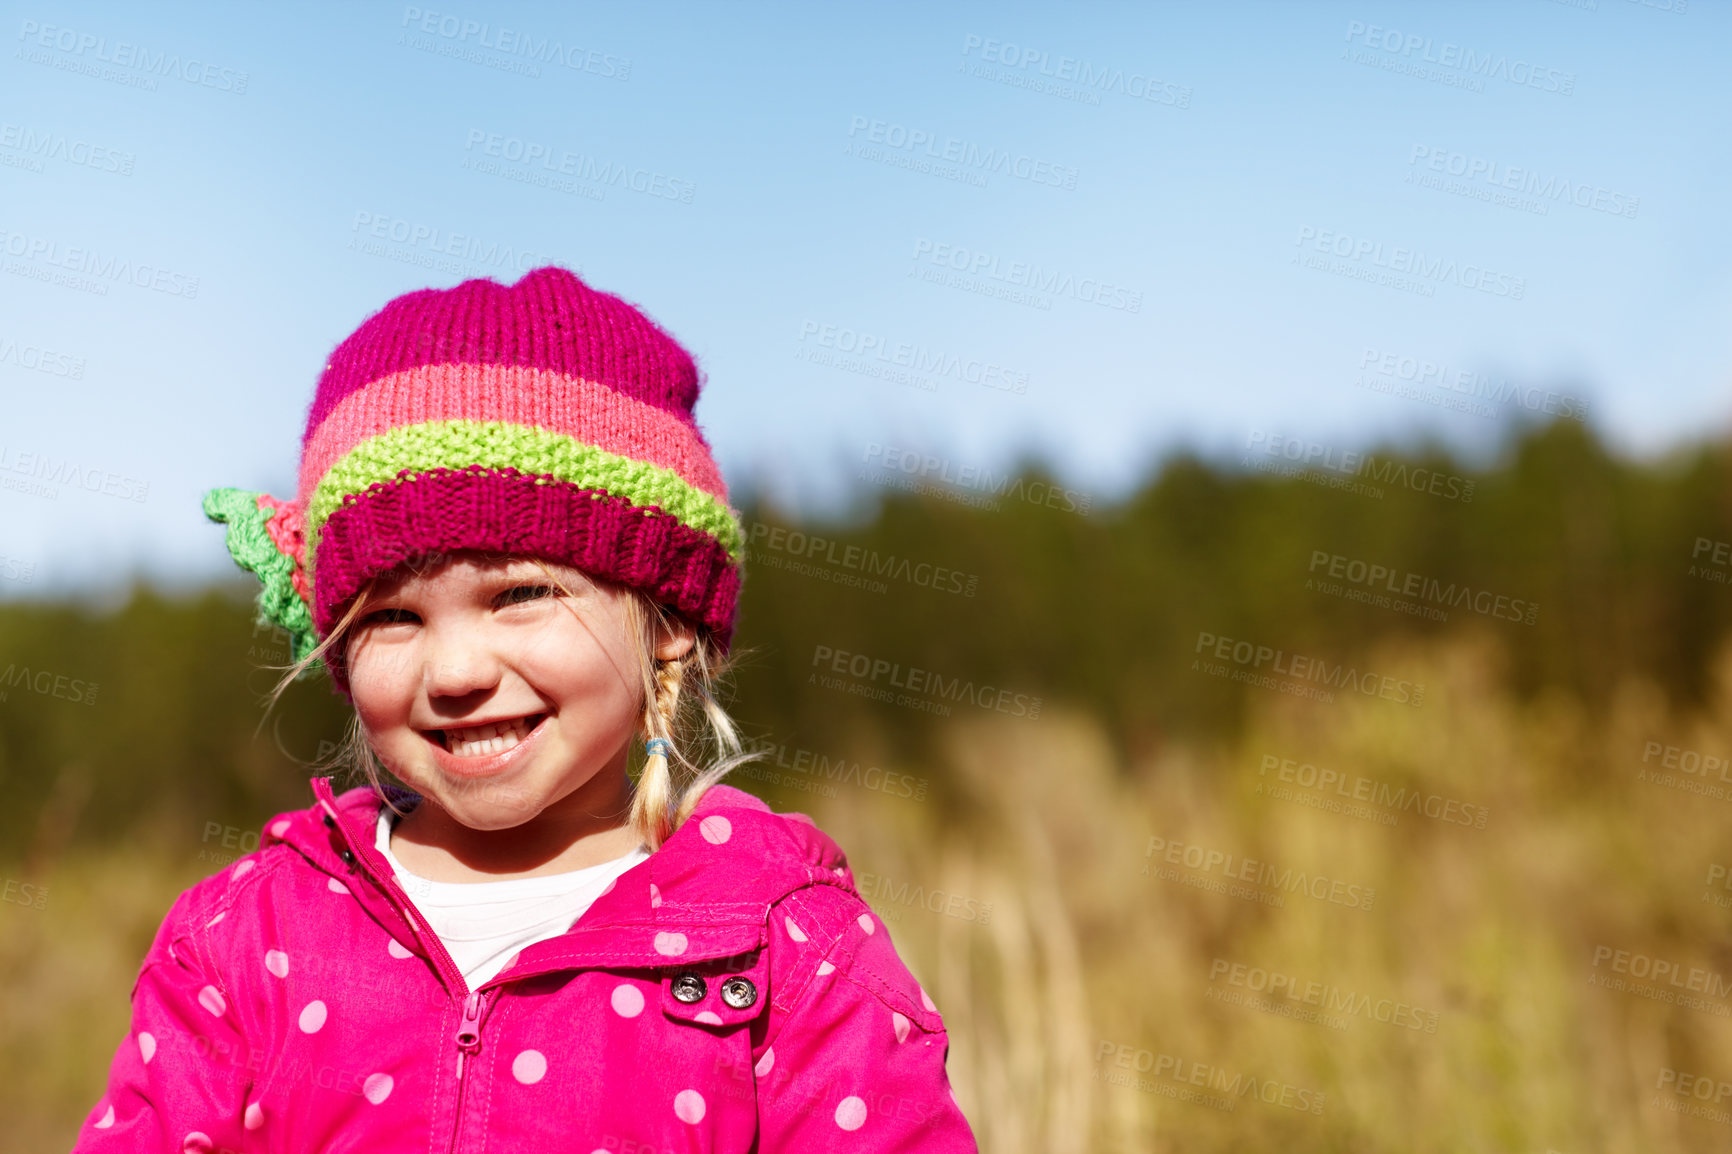 Buy stock photo Portrait of a cute little girl smiling looking happy dressed warm and wearing a pink hat outdoors in nature on a cold autumn day. Adorable young female looking joyful while playing outside in a field